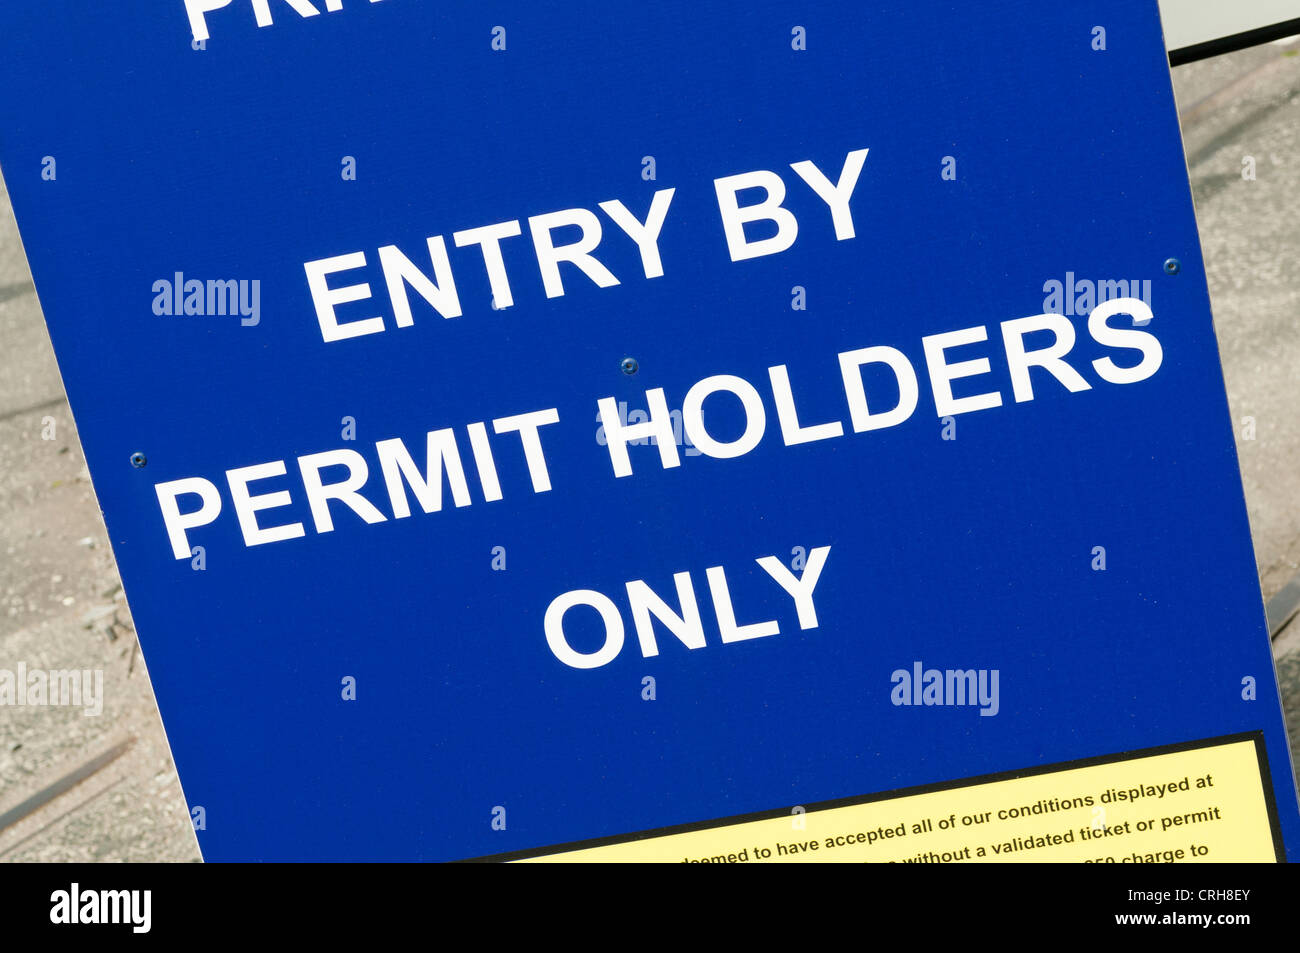 Permit Holders Only sign Stock Photo